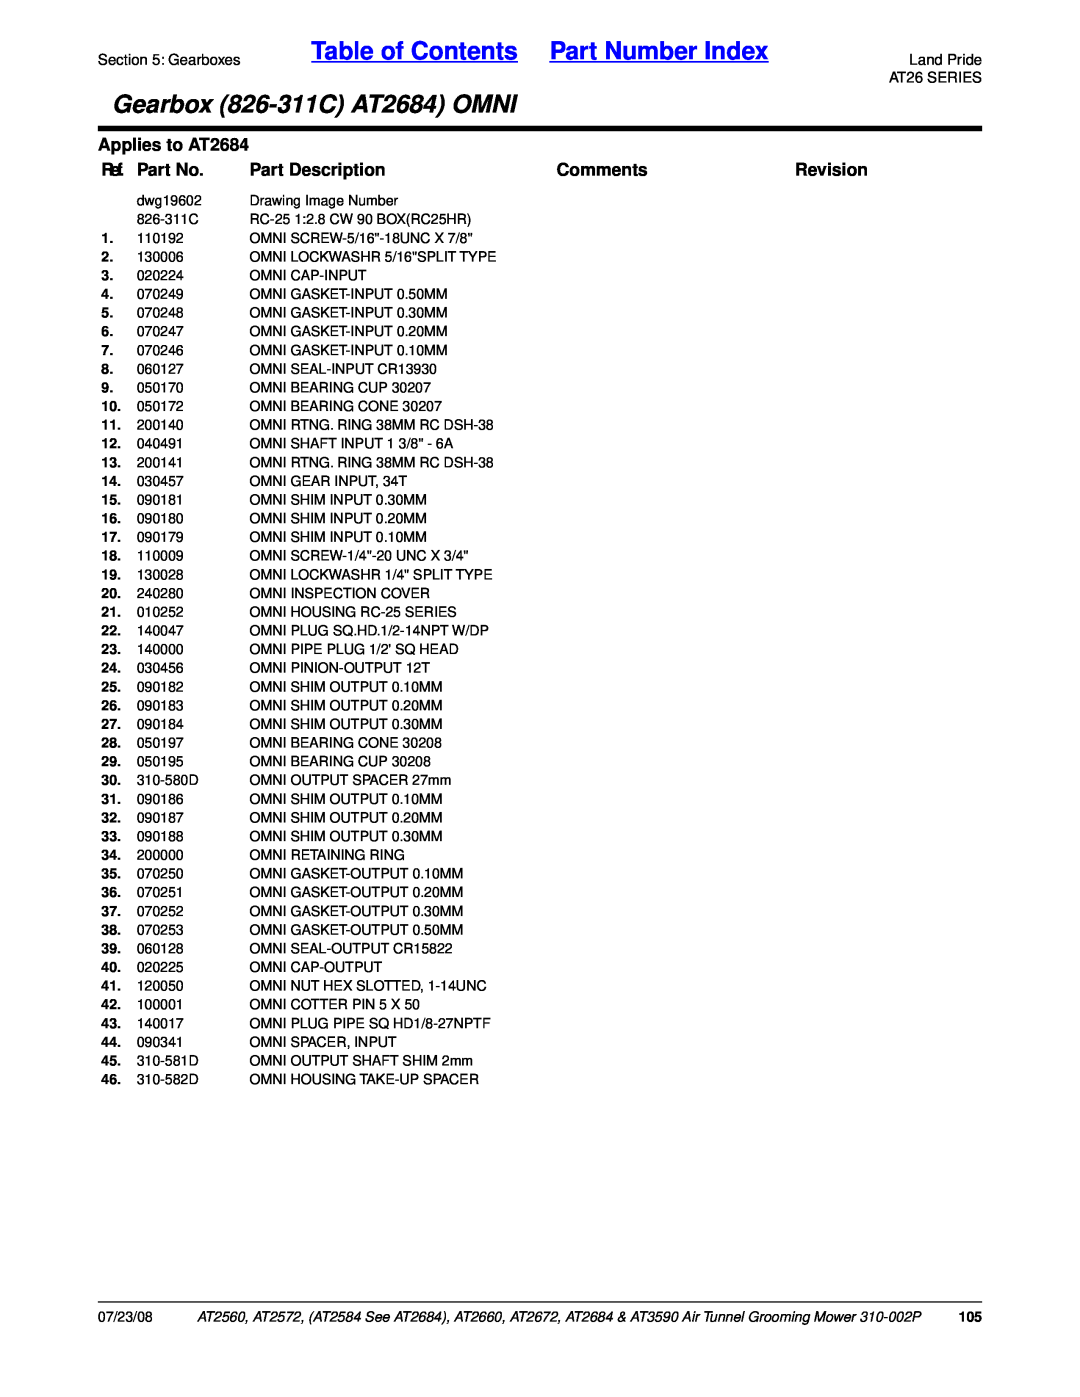 Land Pride Table of Contents Part Number Index, Gearbox 826-311CAT2684 OMNI, Applies to AT2684, Ref. Part No, Comments 